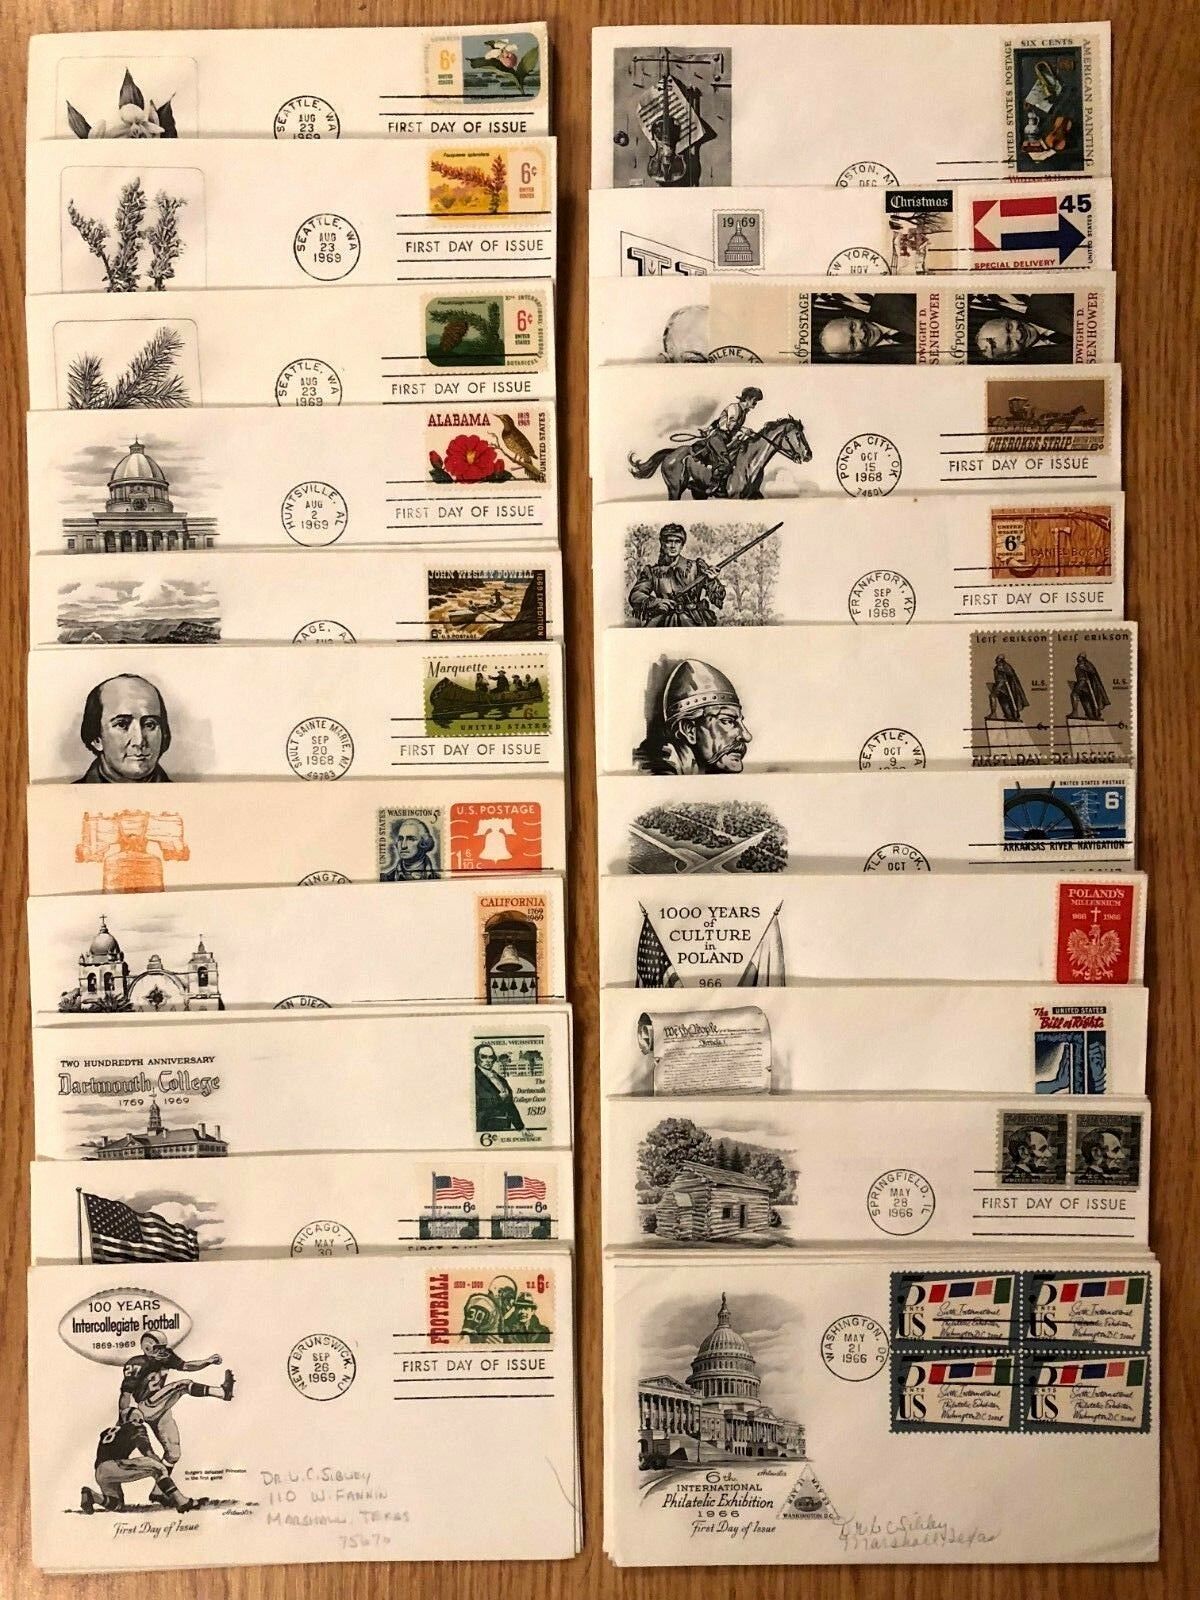 1950s-1970s FIRST DAY COVERS - U.S. FDCs LARGE COLLECTION / 1 COVER